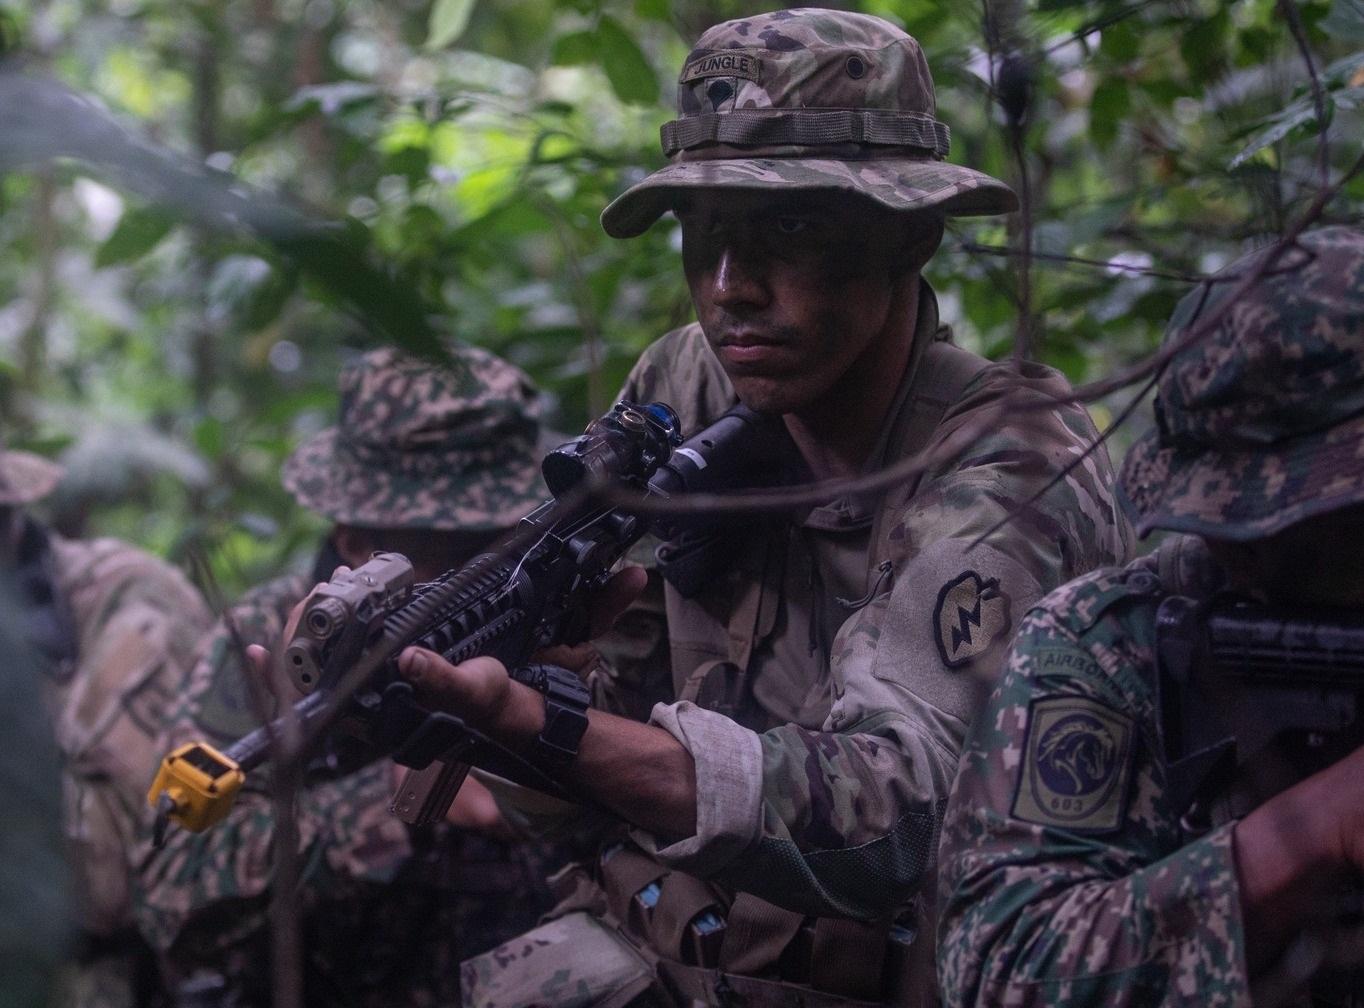 3-4 CAV Raiders and 4th Royal Malaysian Regiment patrol the jungle during a field training exercise as a part of Keris Strike 2022.